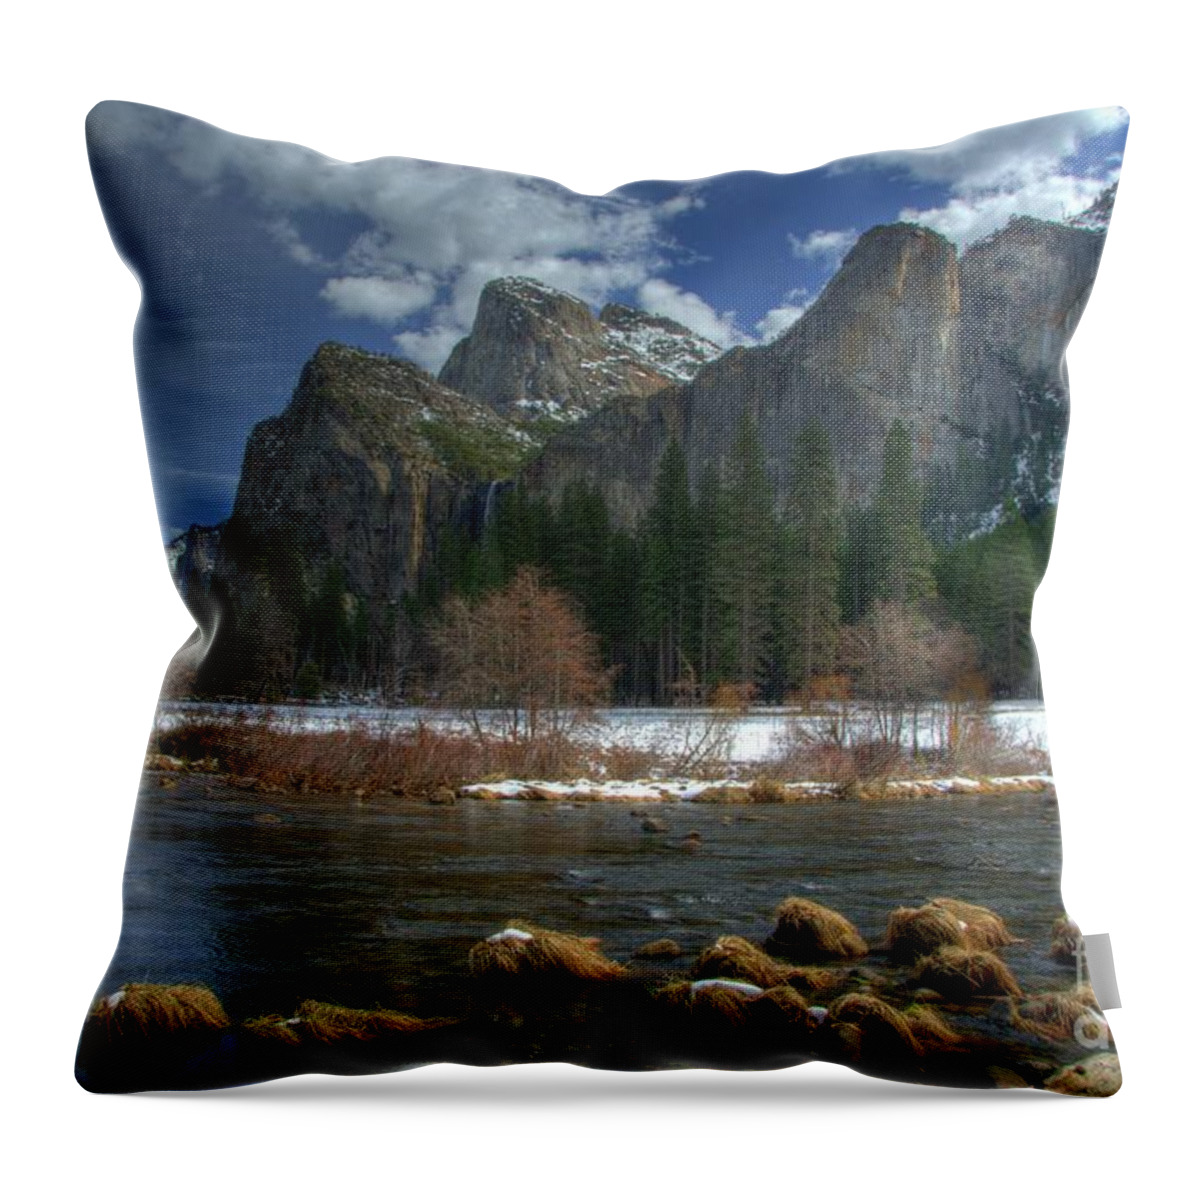 Yosemite Throw Pillow featuring the photograph Yosemite #34 by Marc Bittan